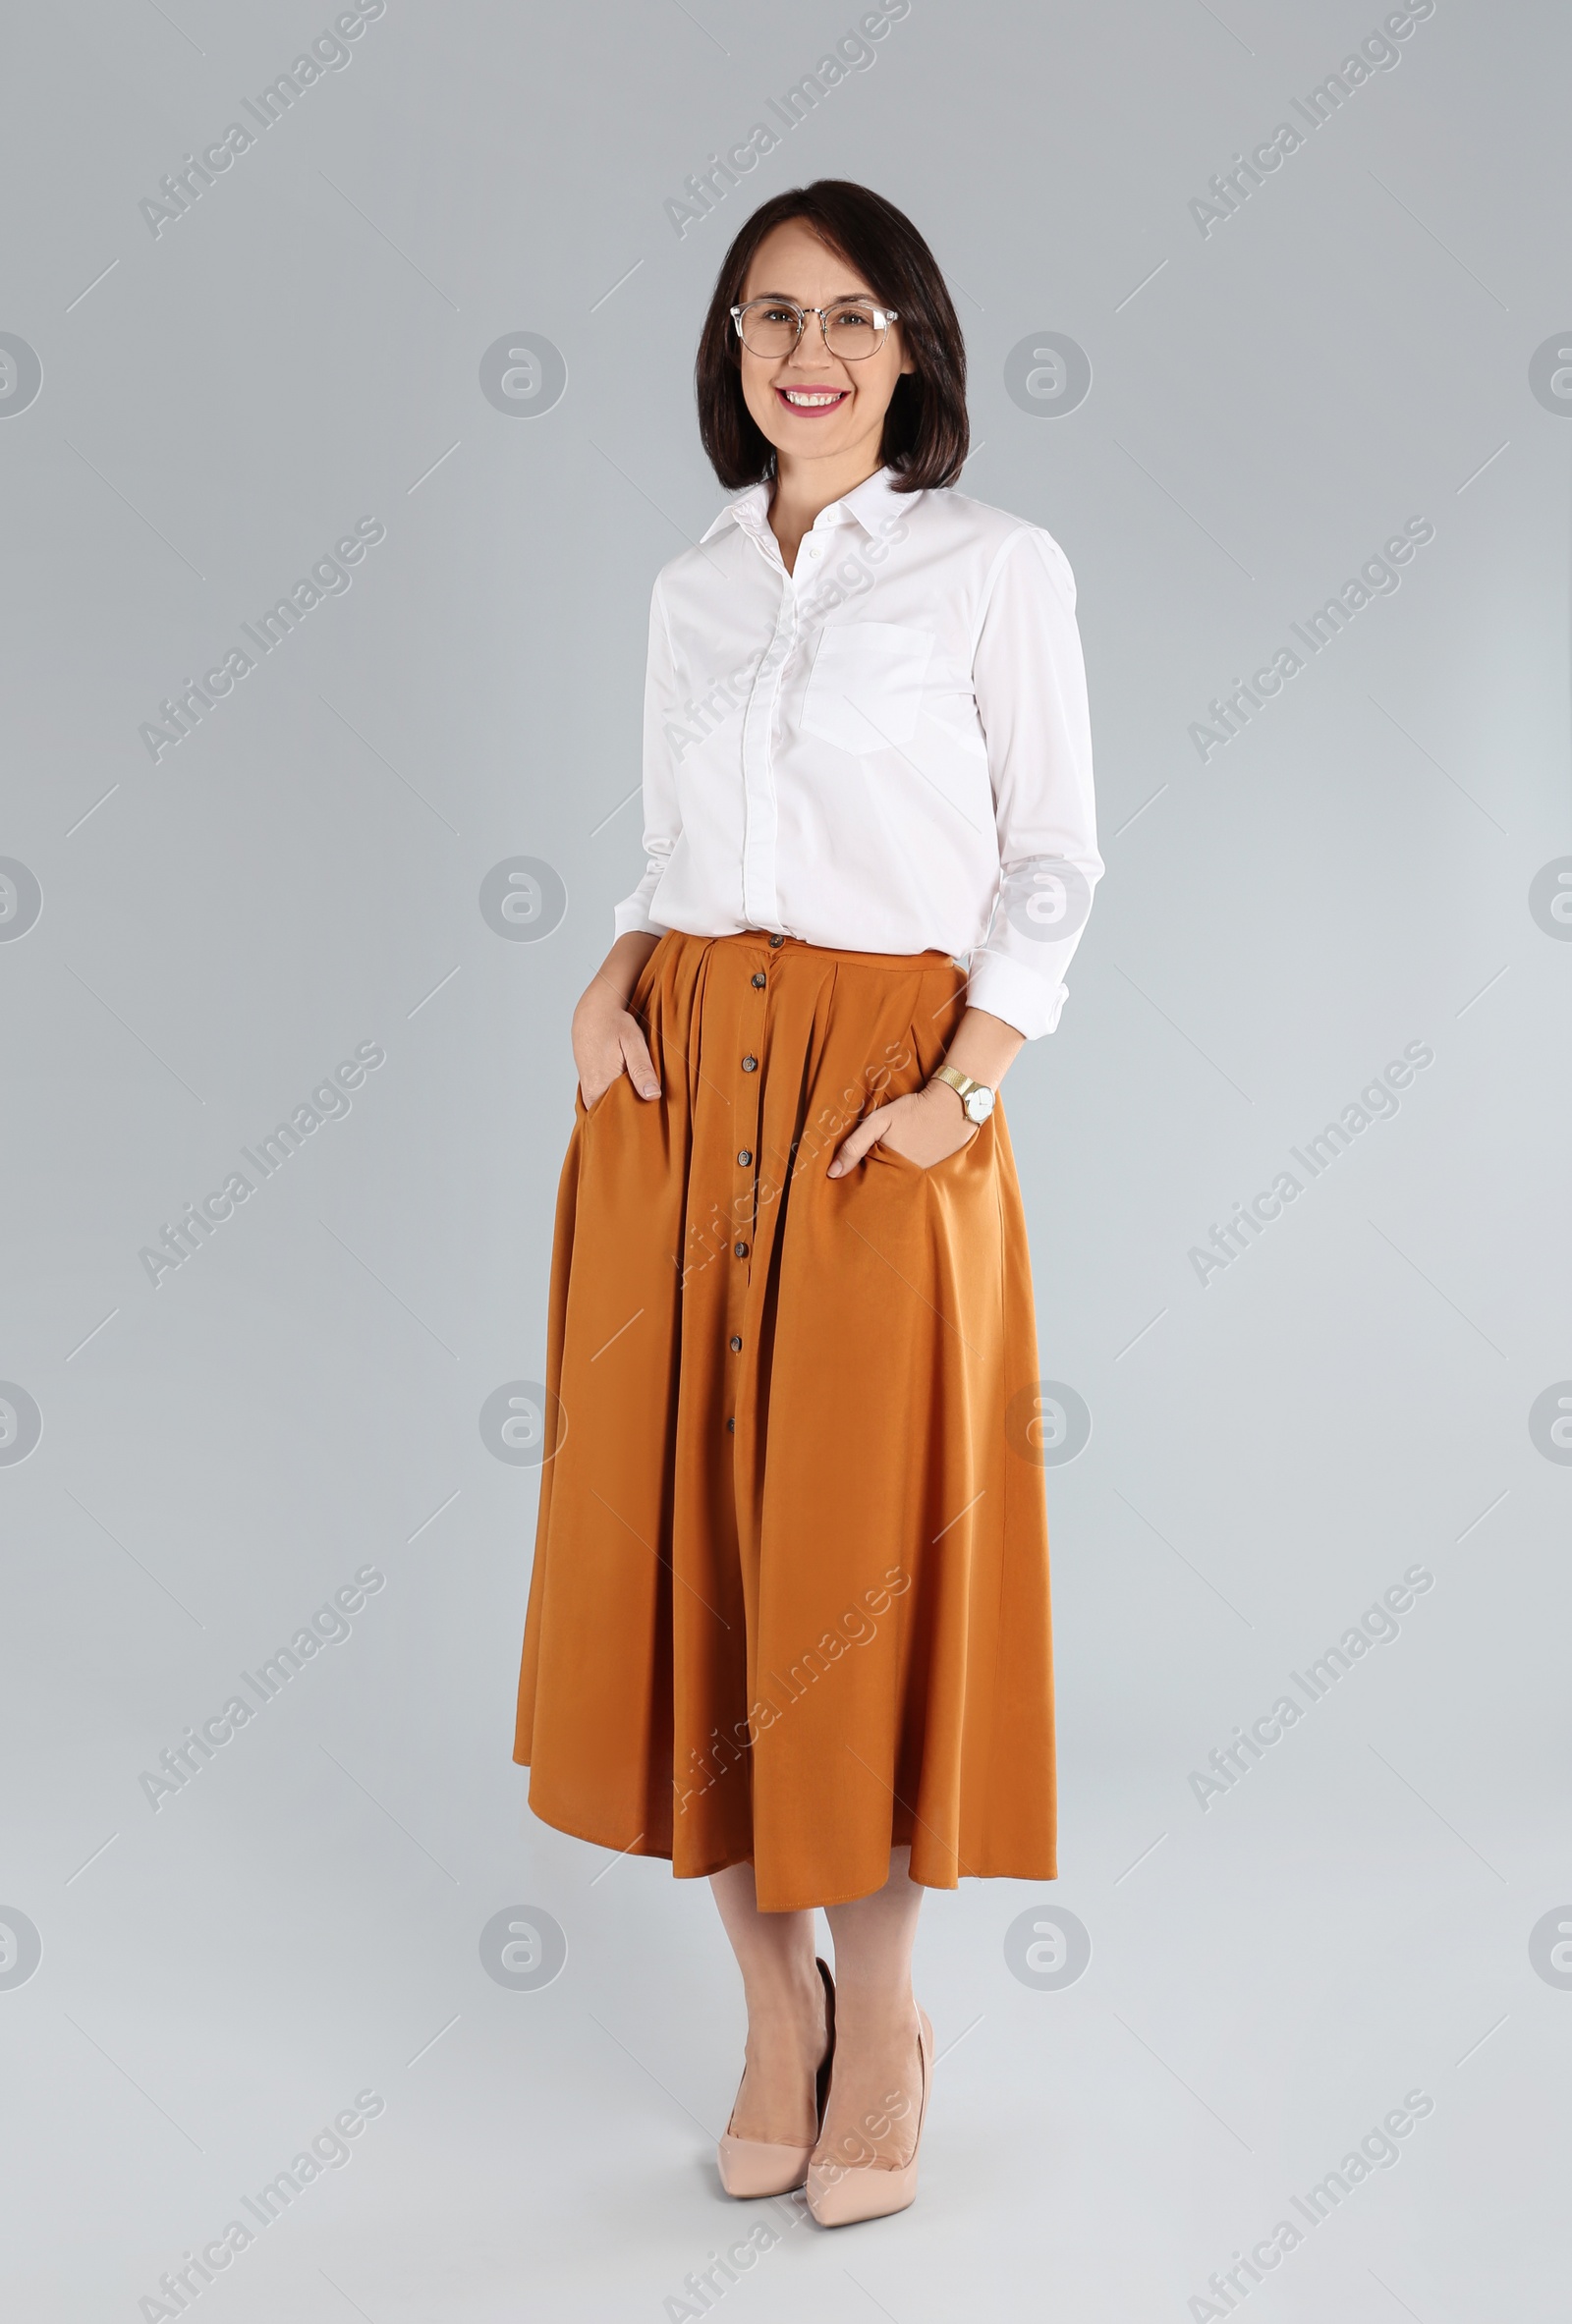 Photo of Full length portrait of mature businesswoman on light grey background